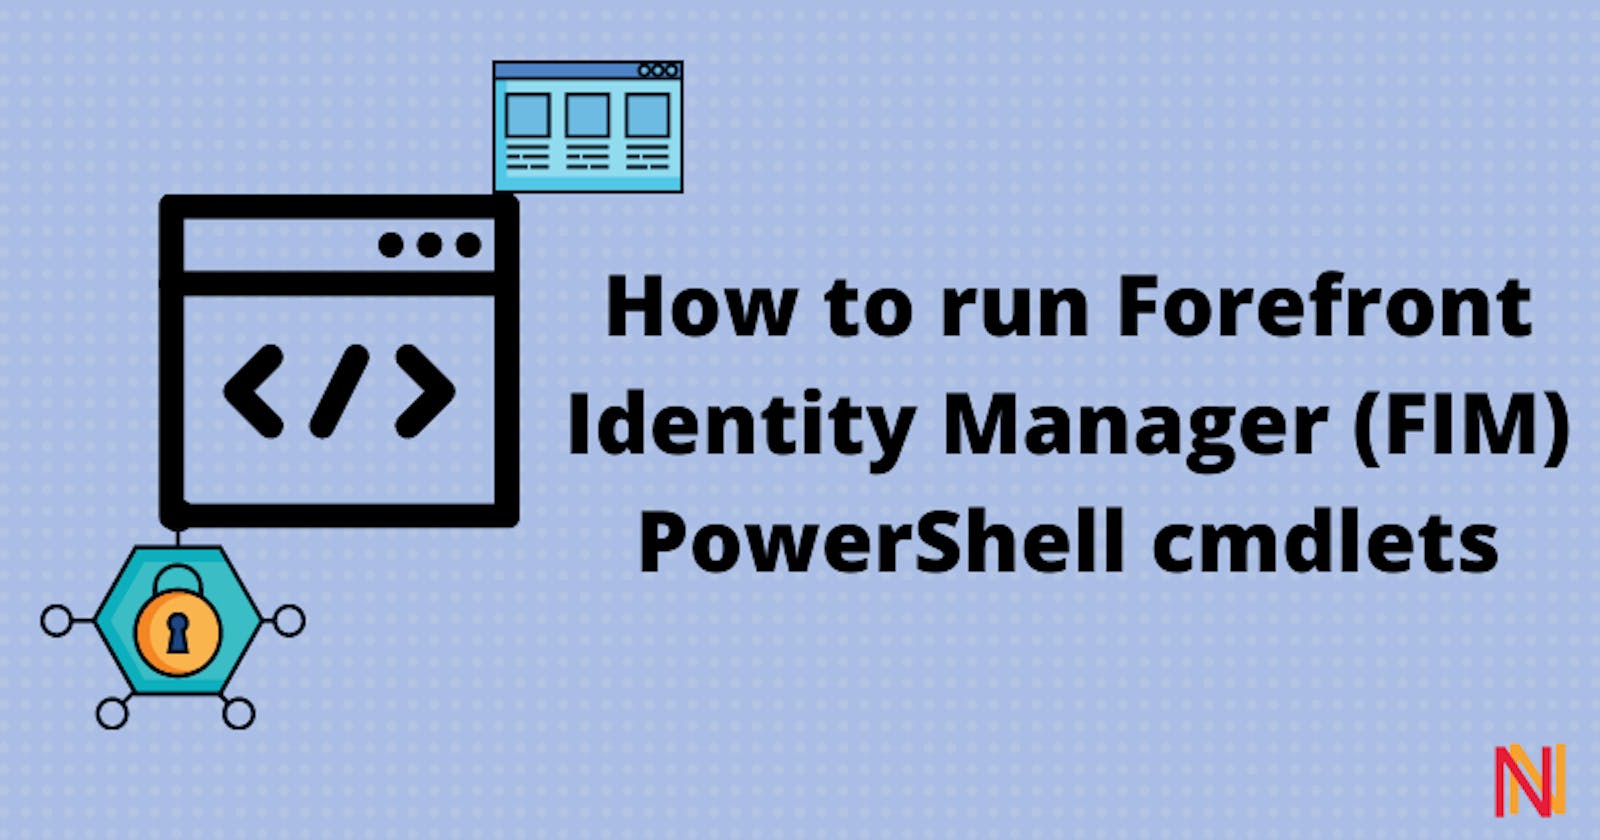 How to run Forefront Identity Manager (FIM) PowerShell cmdlets